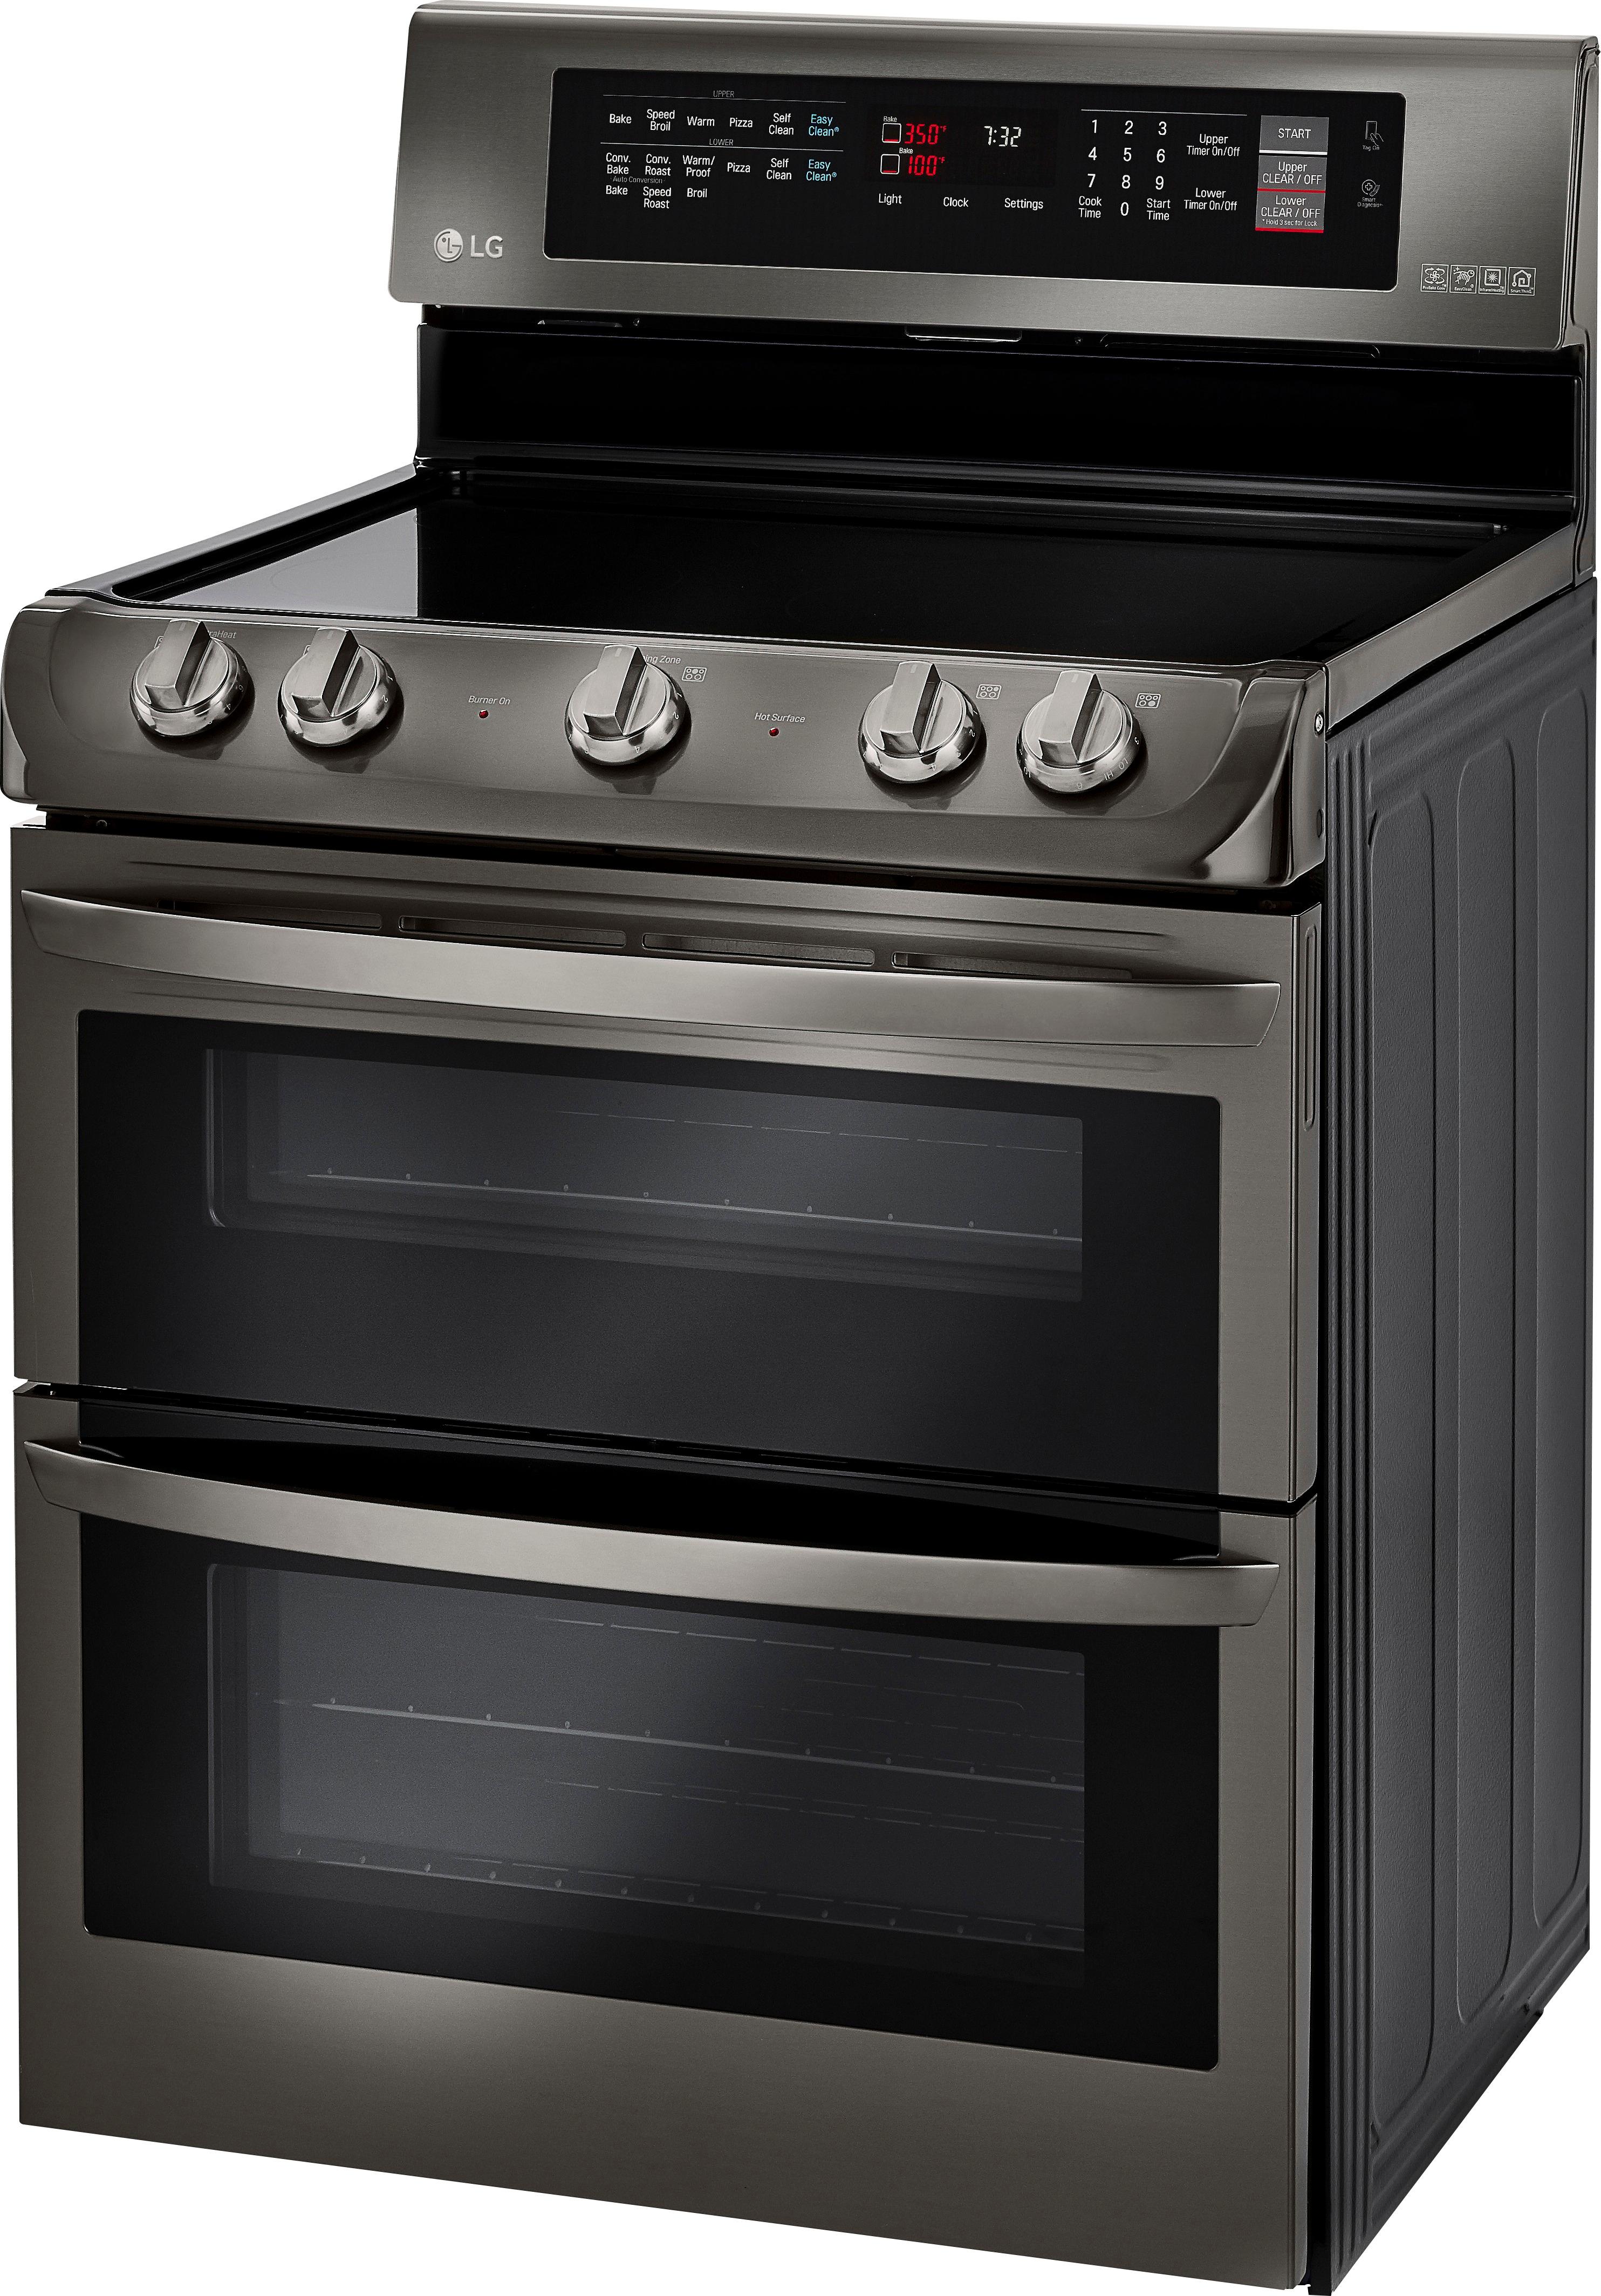 LG 7.3 Cu. Ft. Self-Cleaning Freestanding Double Oven Electric Range Electric Black Stainless Steel Stove